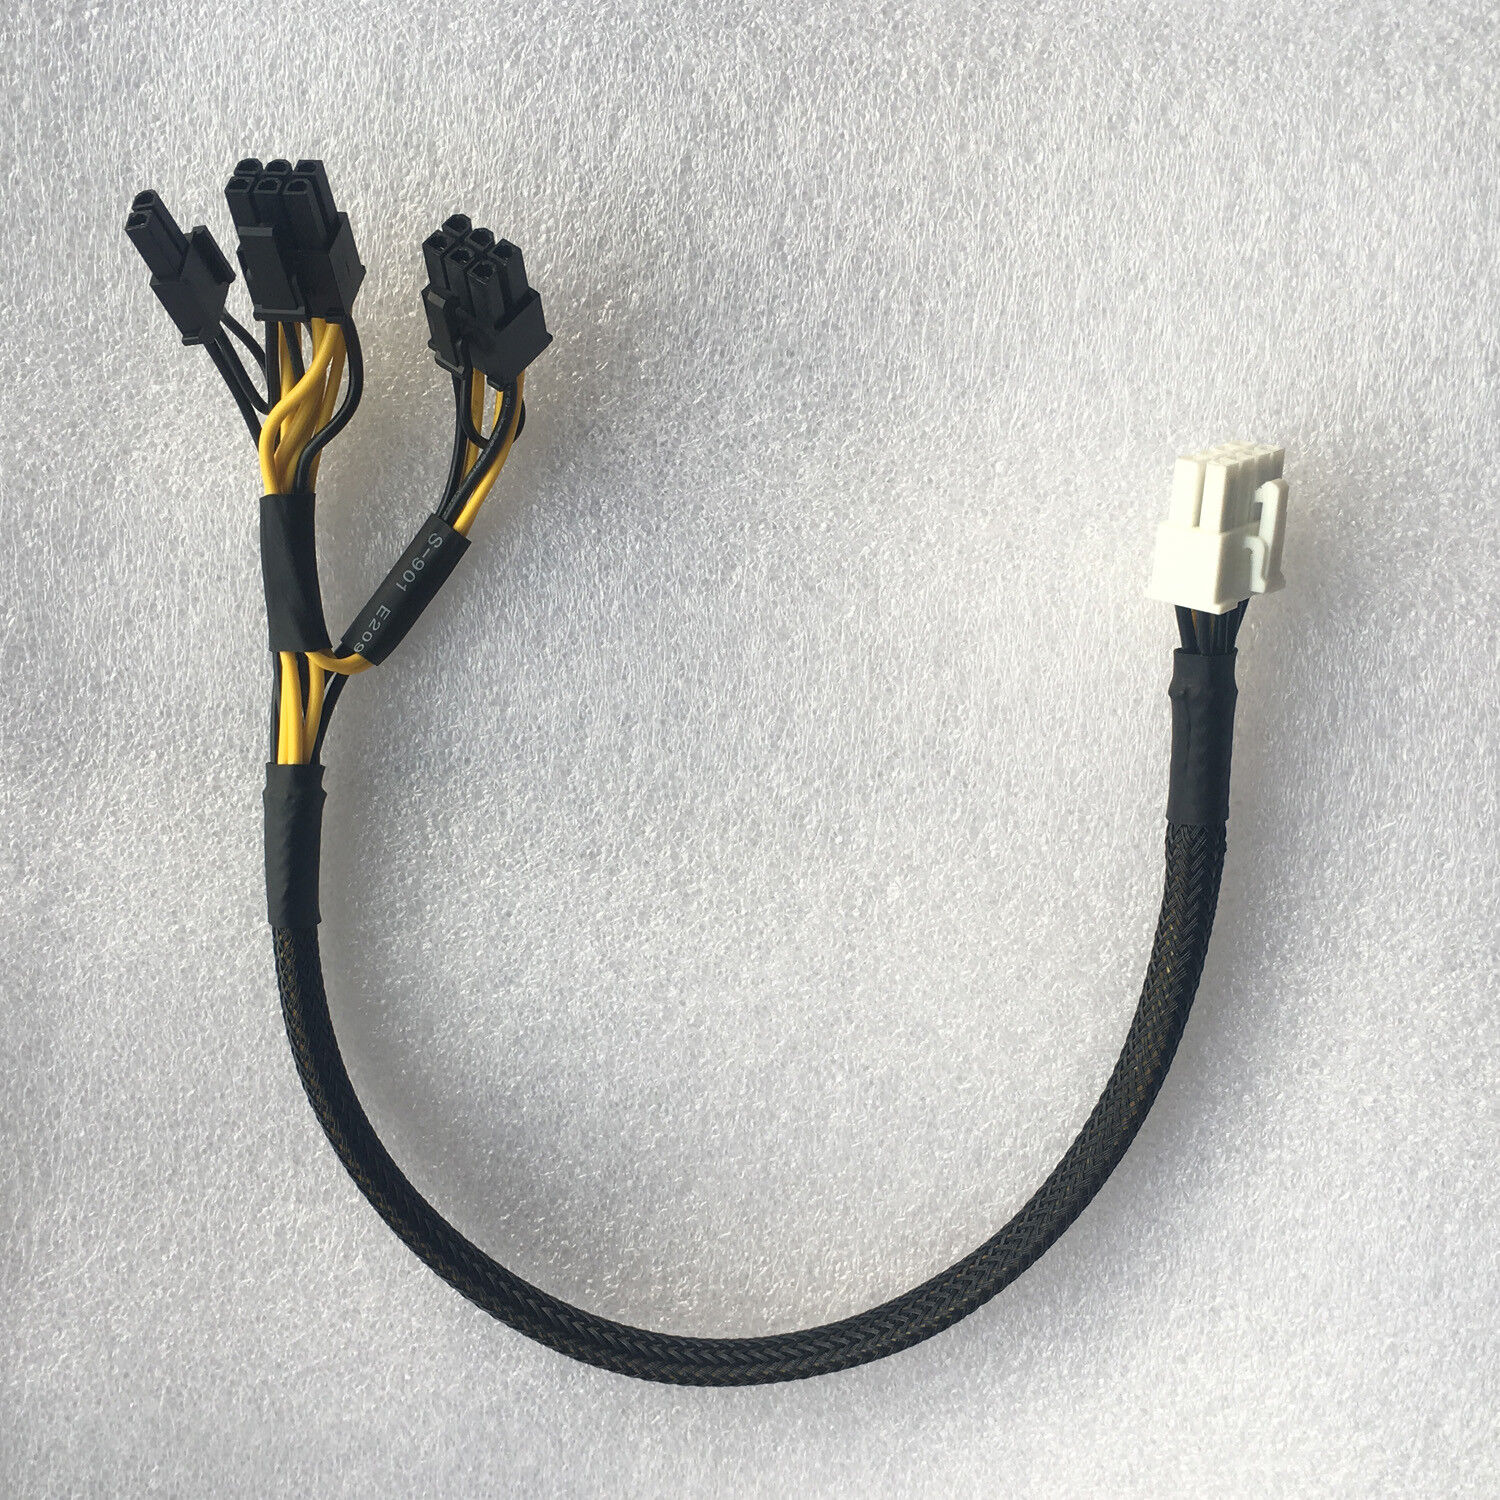 8pin to 8+6pin Power Adapter Cable for DELL equal to 9H6FV